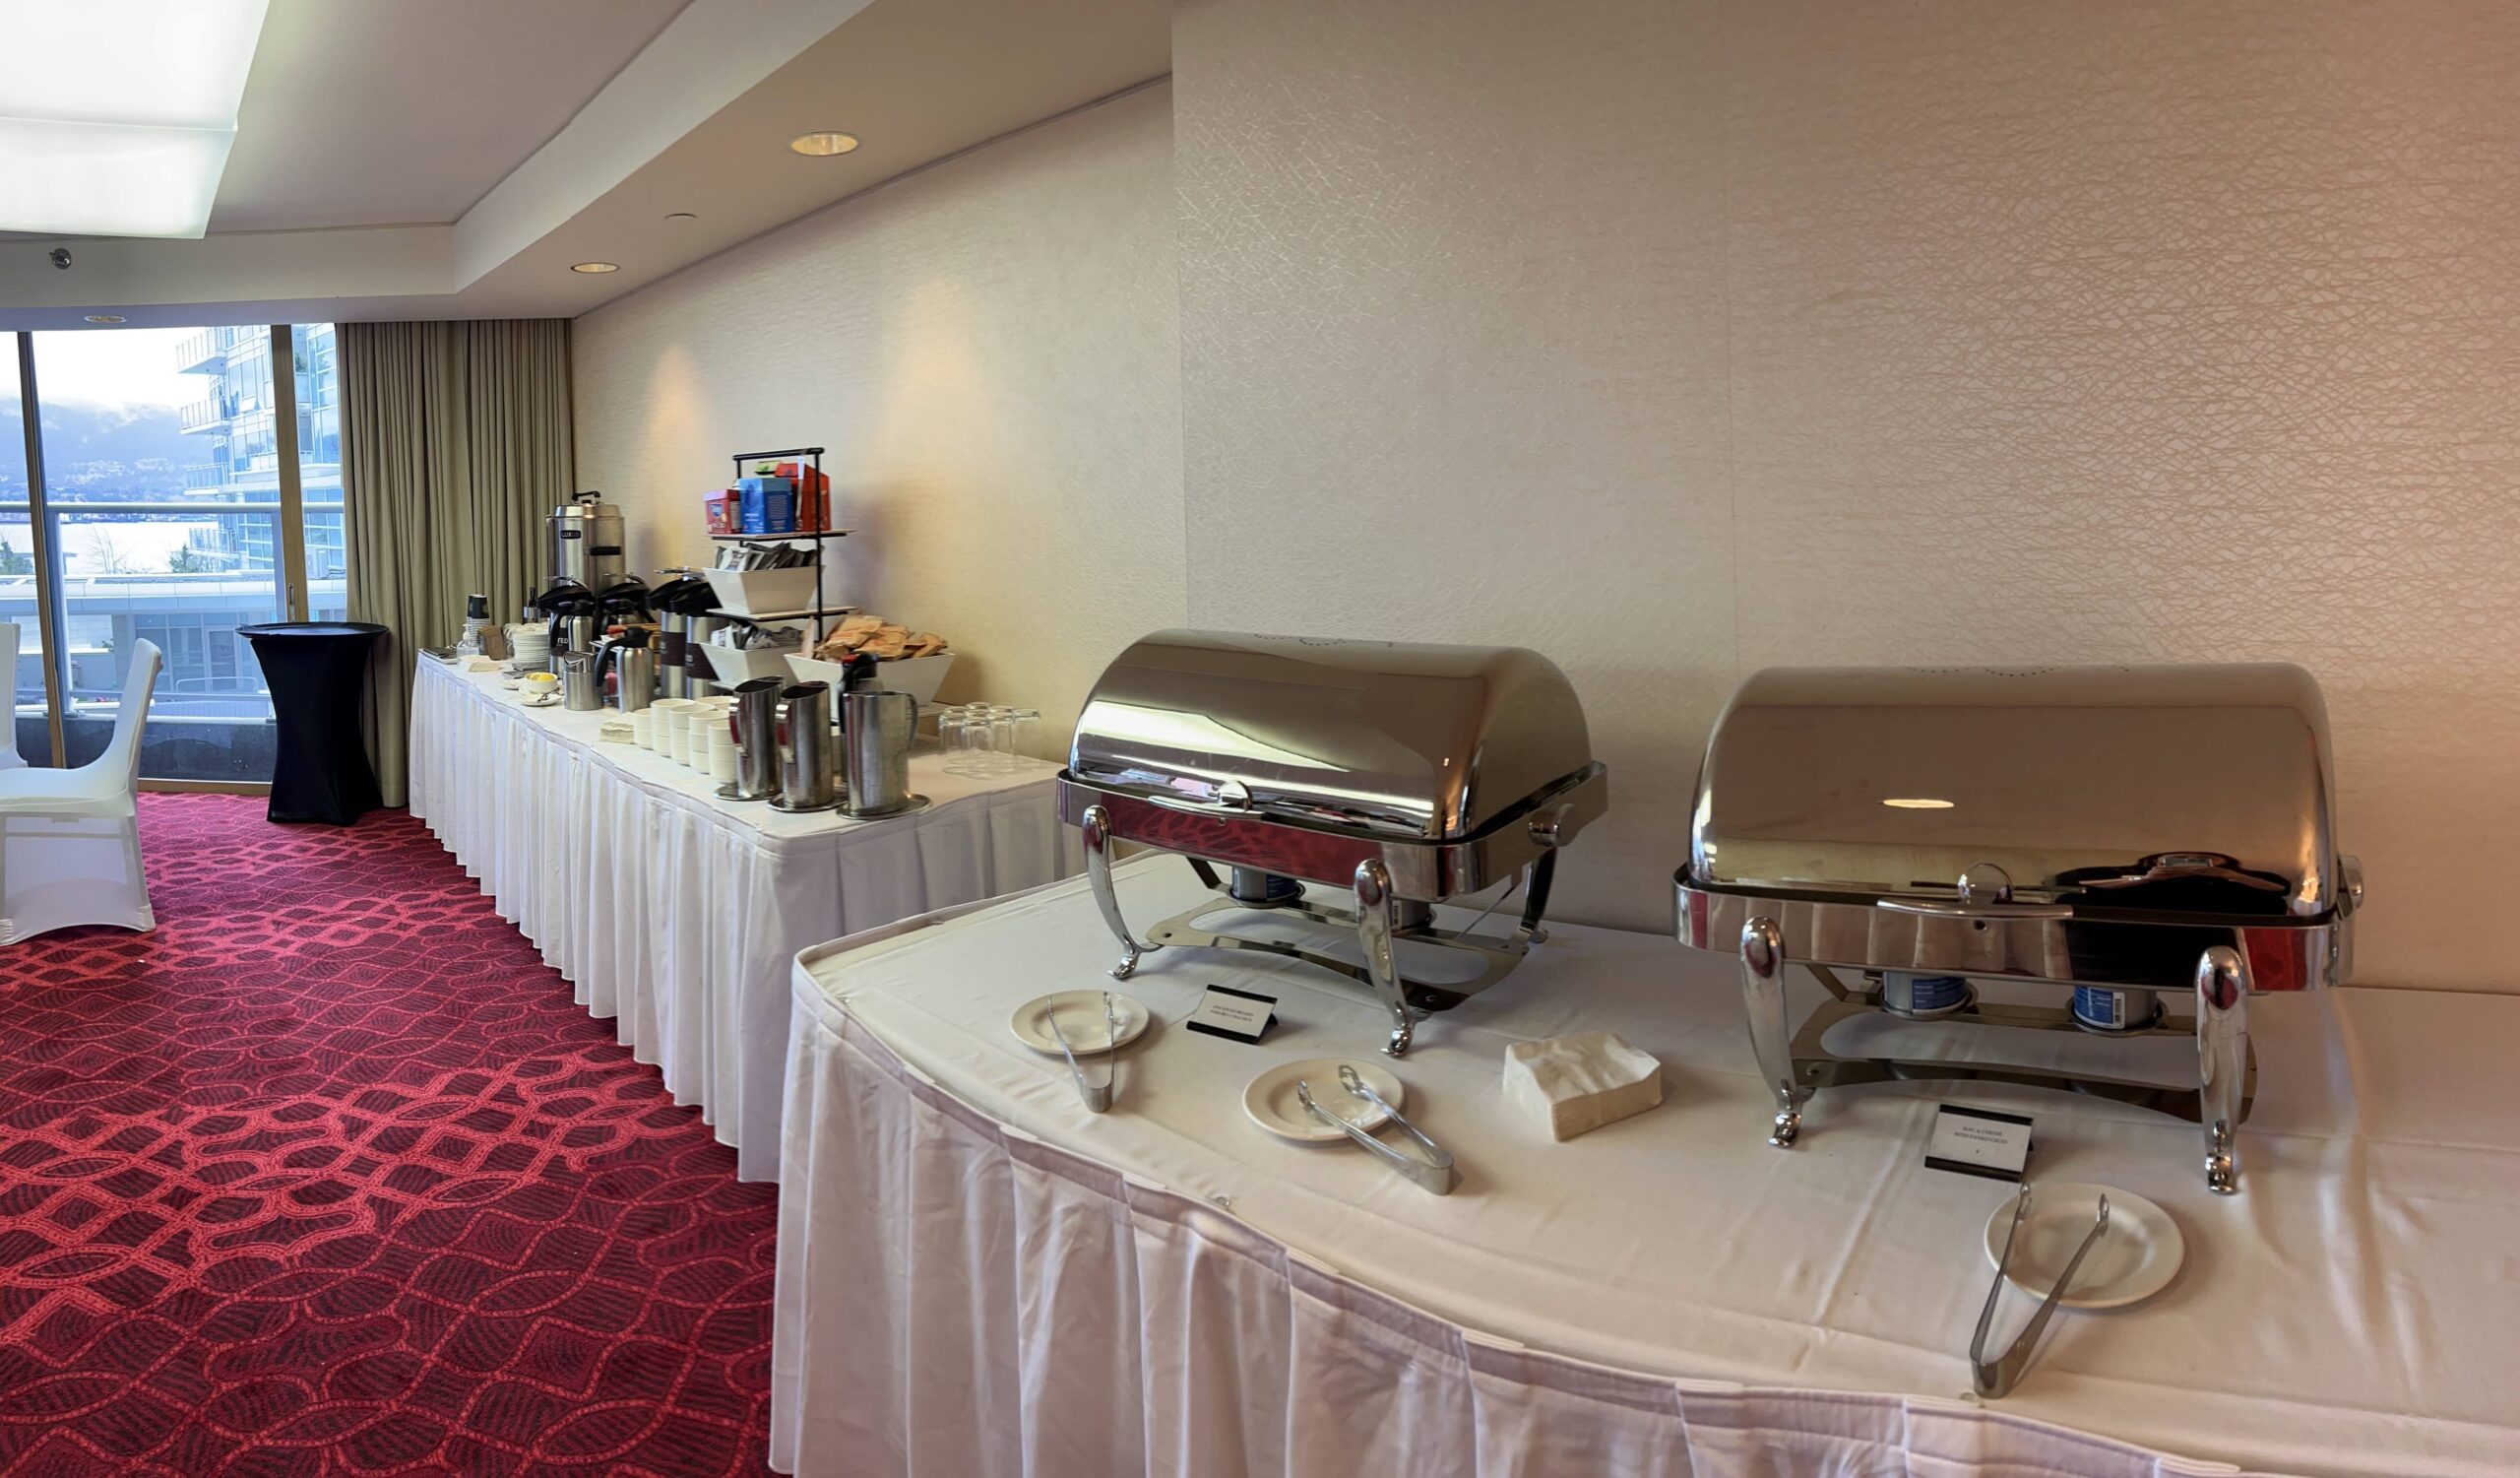 Catering (breakfast and lunch) for our students and guests at the Pinnacle Hotel